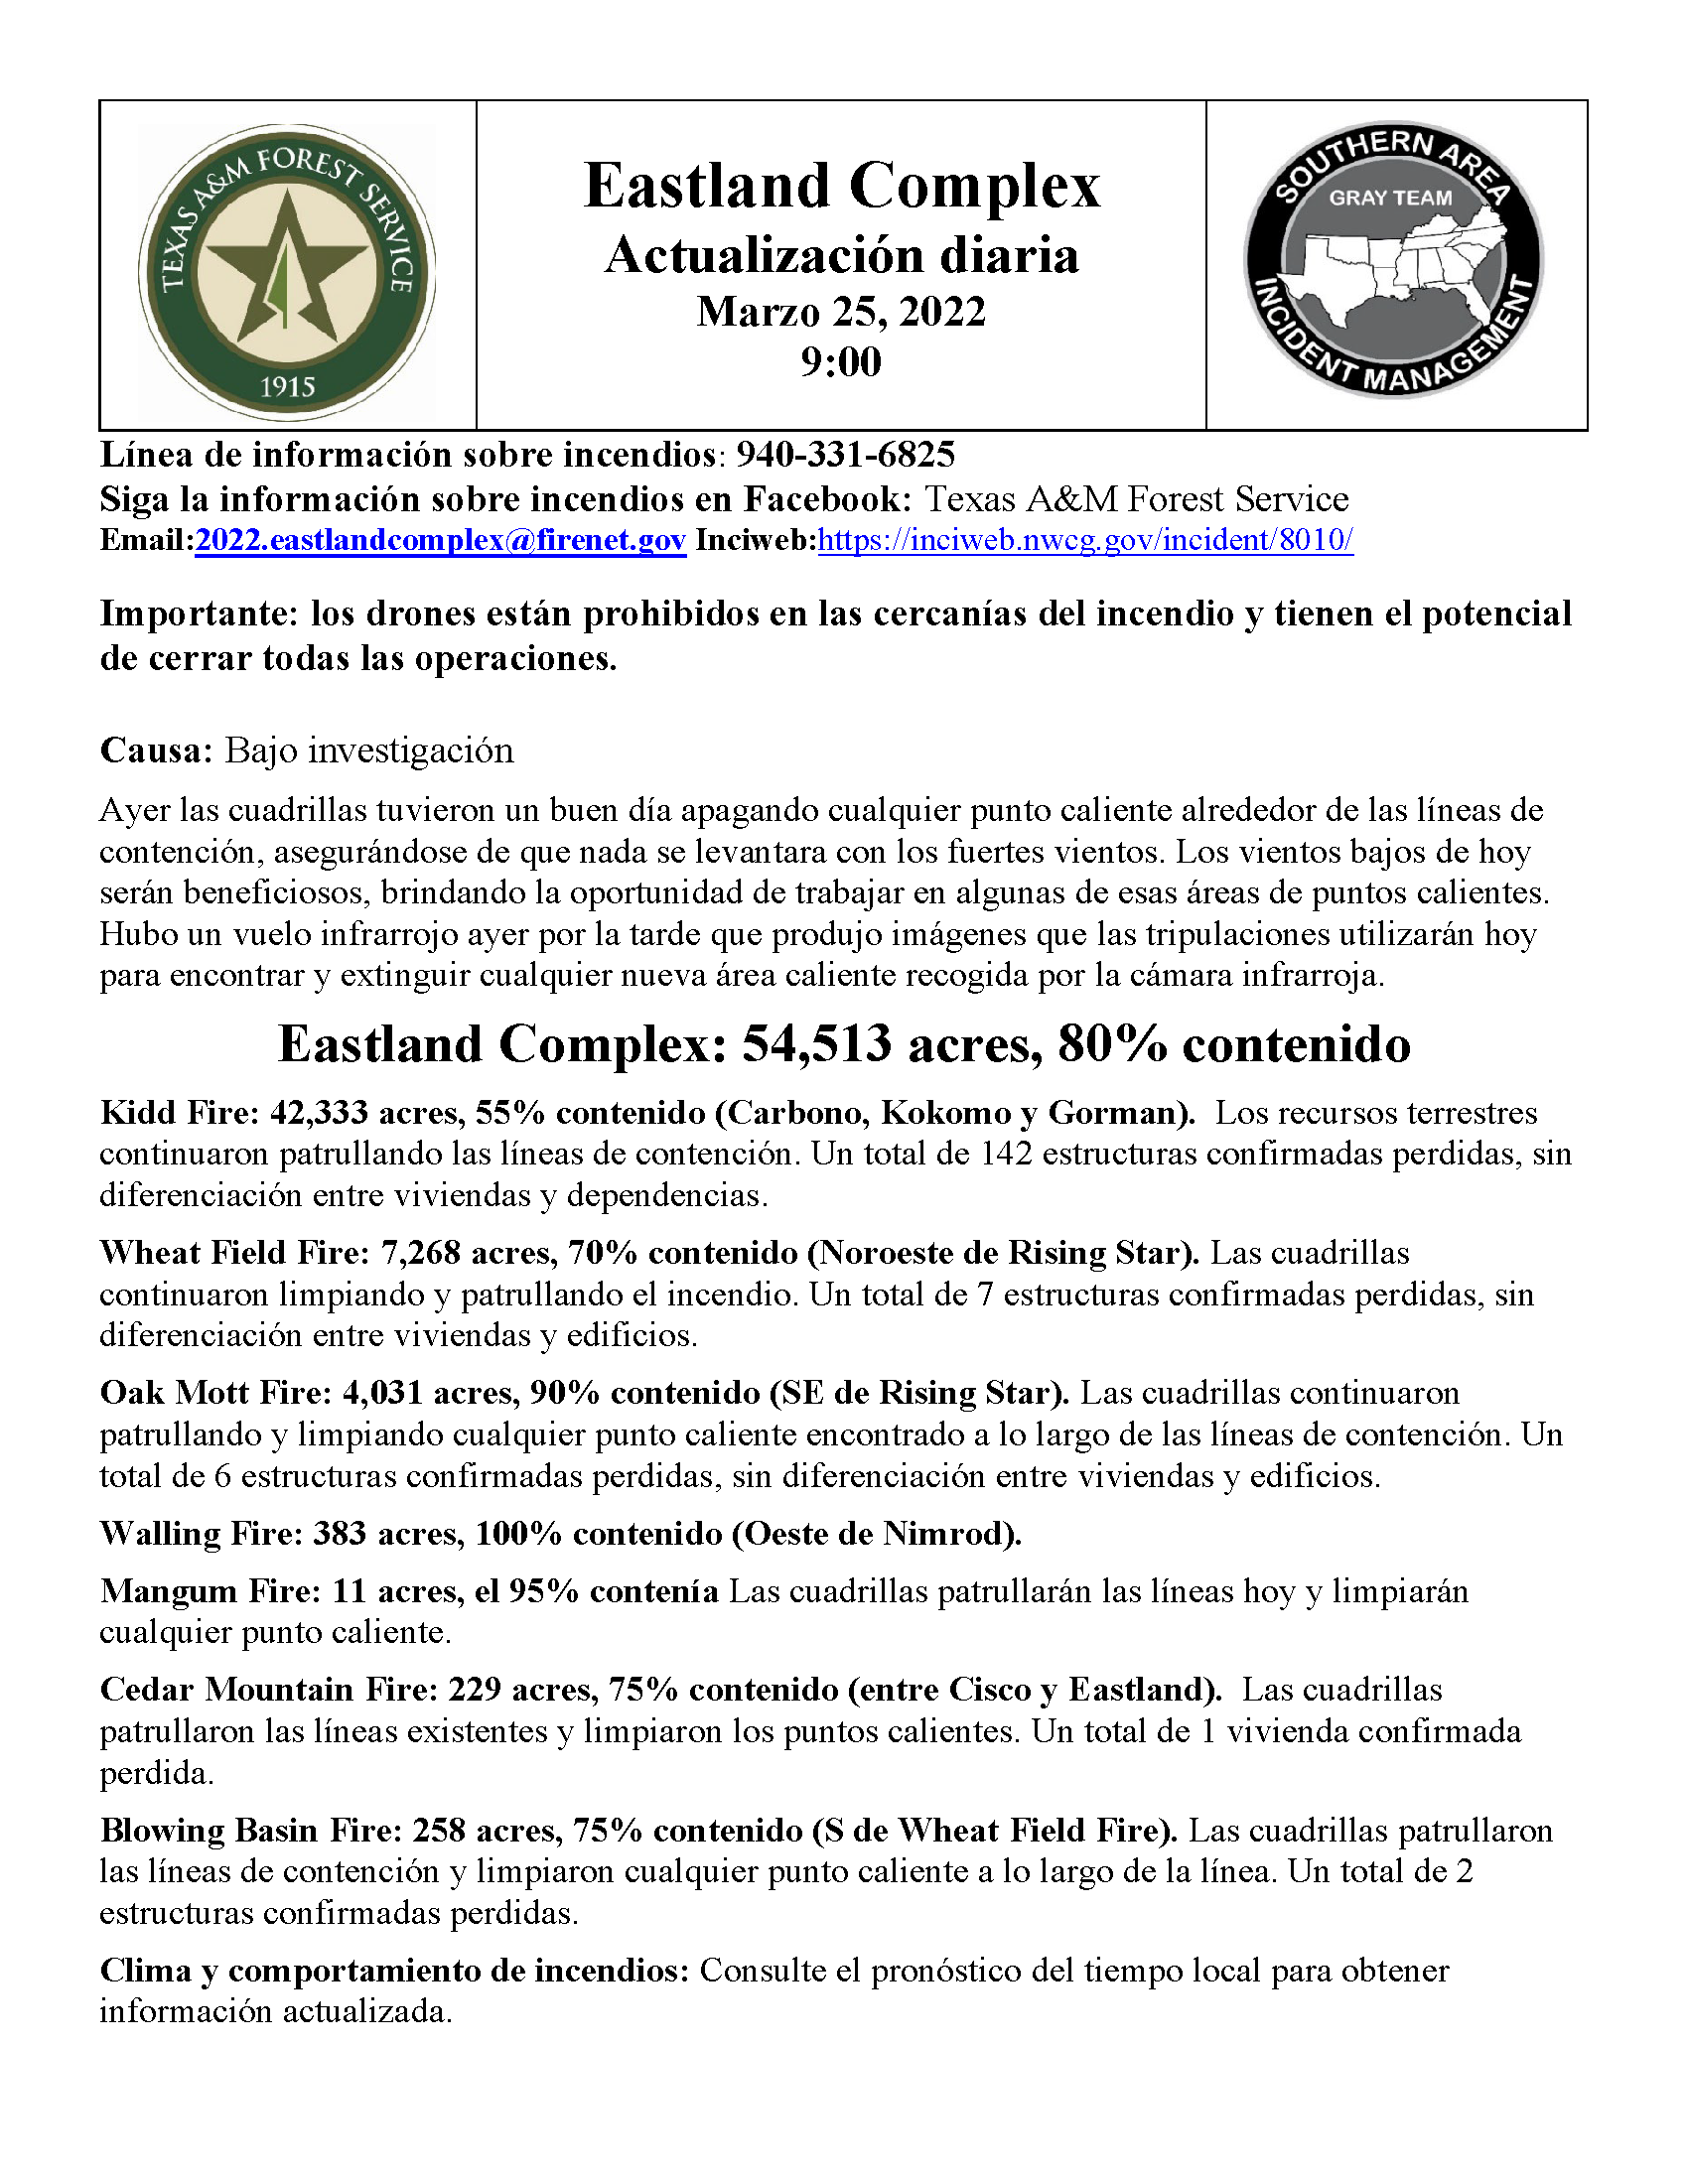 The document contains the daily update of the Eastland Complex fire, in spanish.